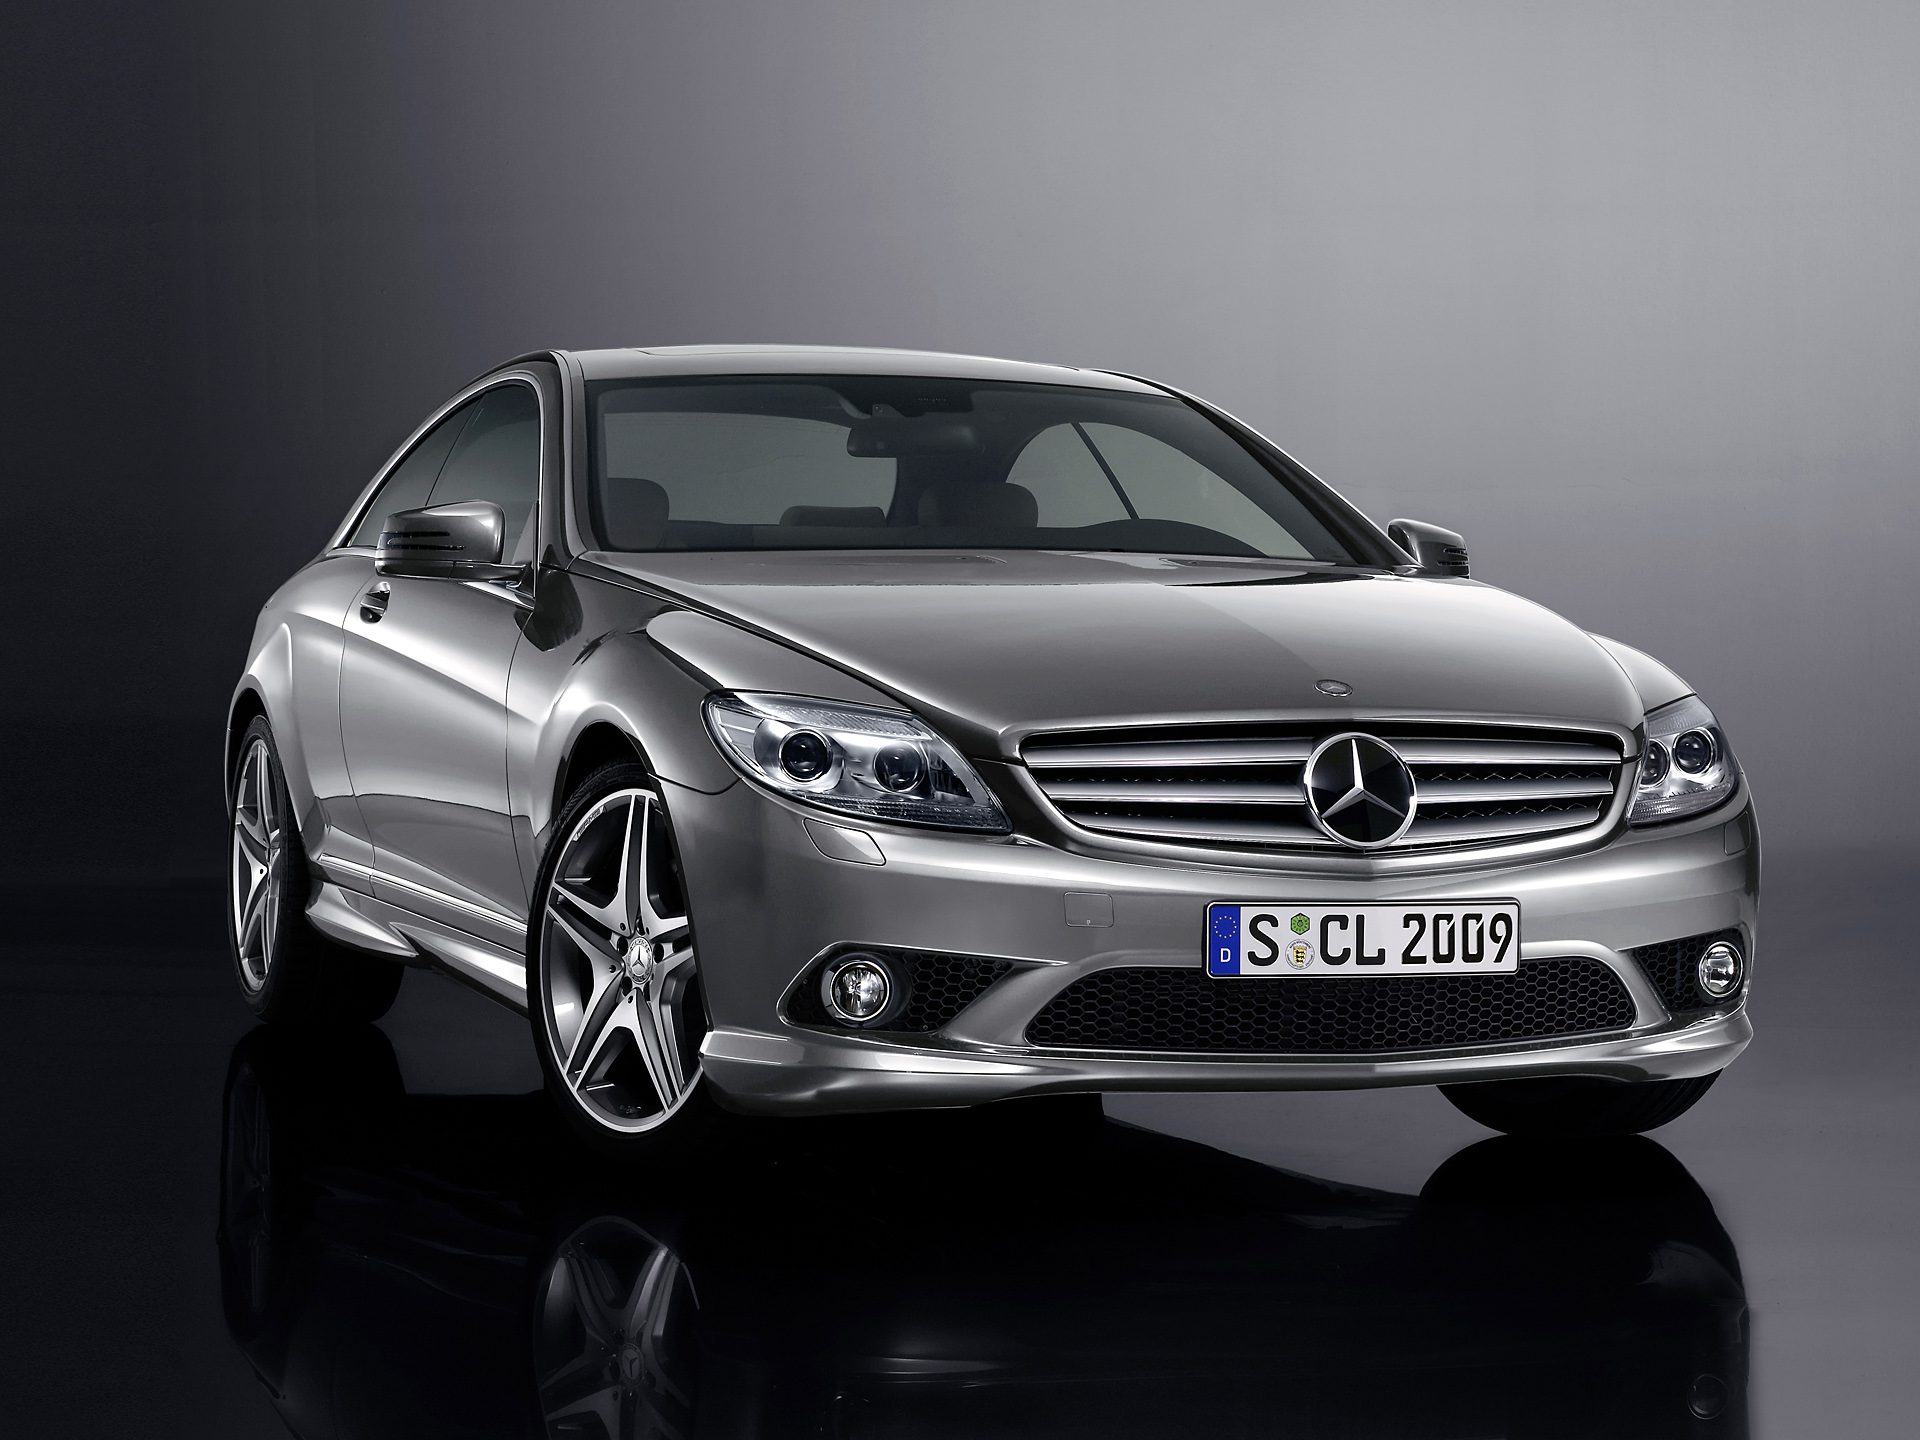 Used Mercedes-Benz CL Coupe (2007 - 2014) Review